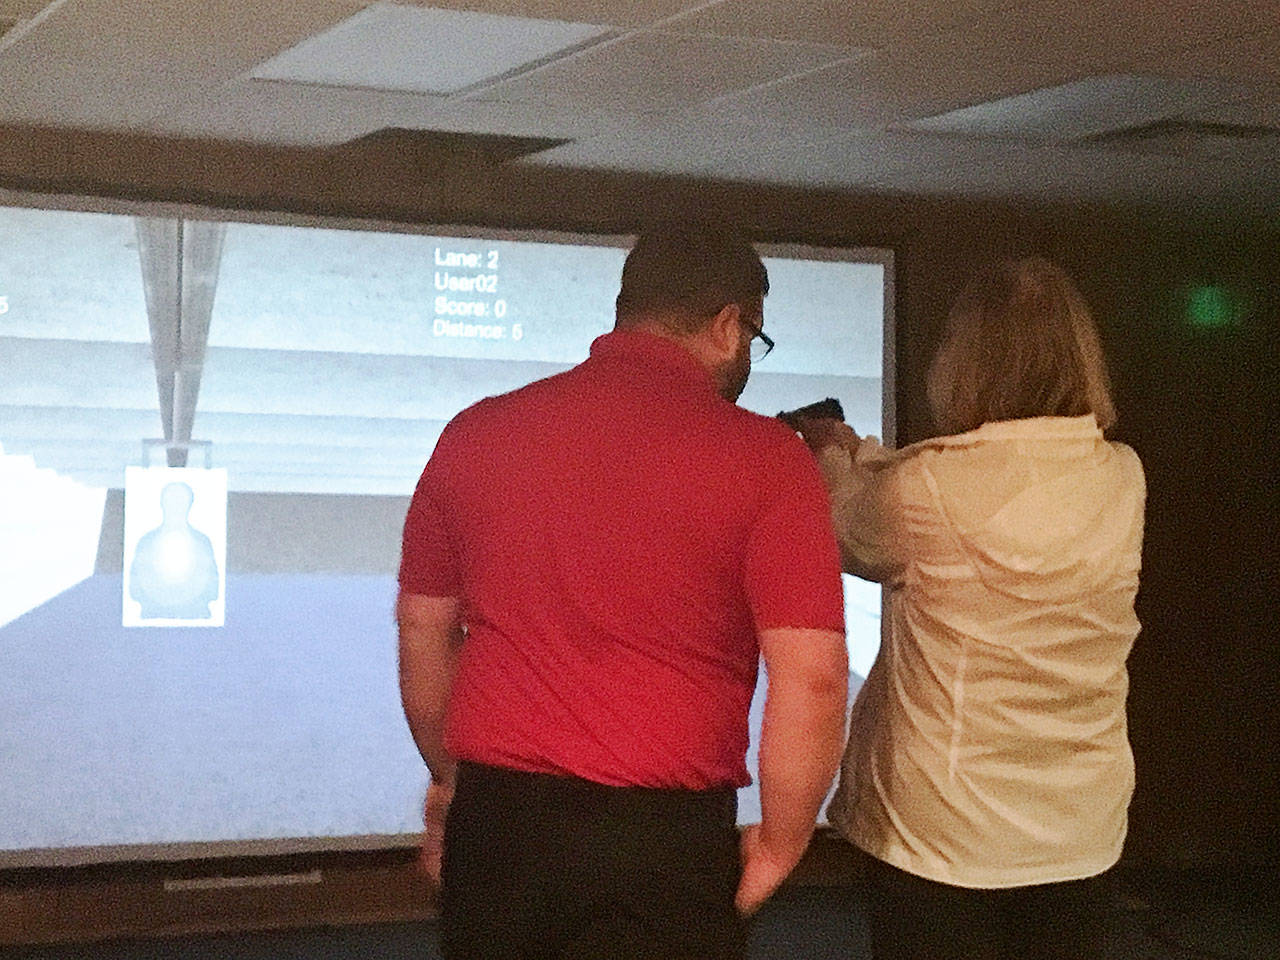 An Oak Harbor Police Department Citizens Advisory Board member uses a firearms training simulator. Participants of the free Citizens’ Academy held by the Oak Harbor Police Department will likely have the chance to use the simulator and do other police training during the program. Photo provided